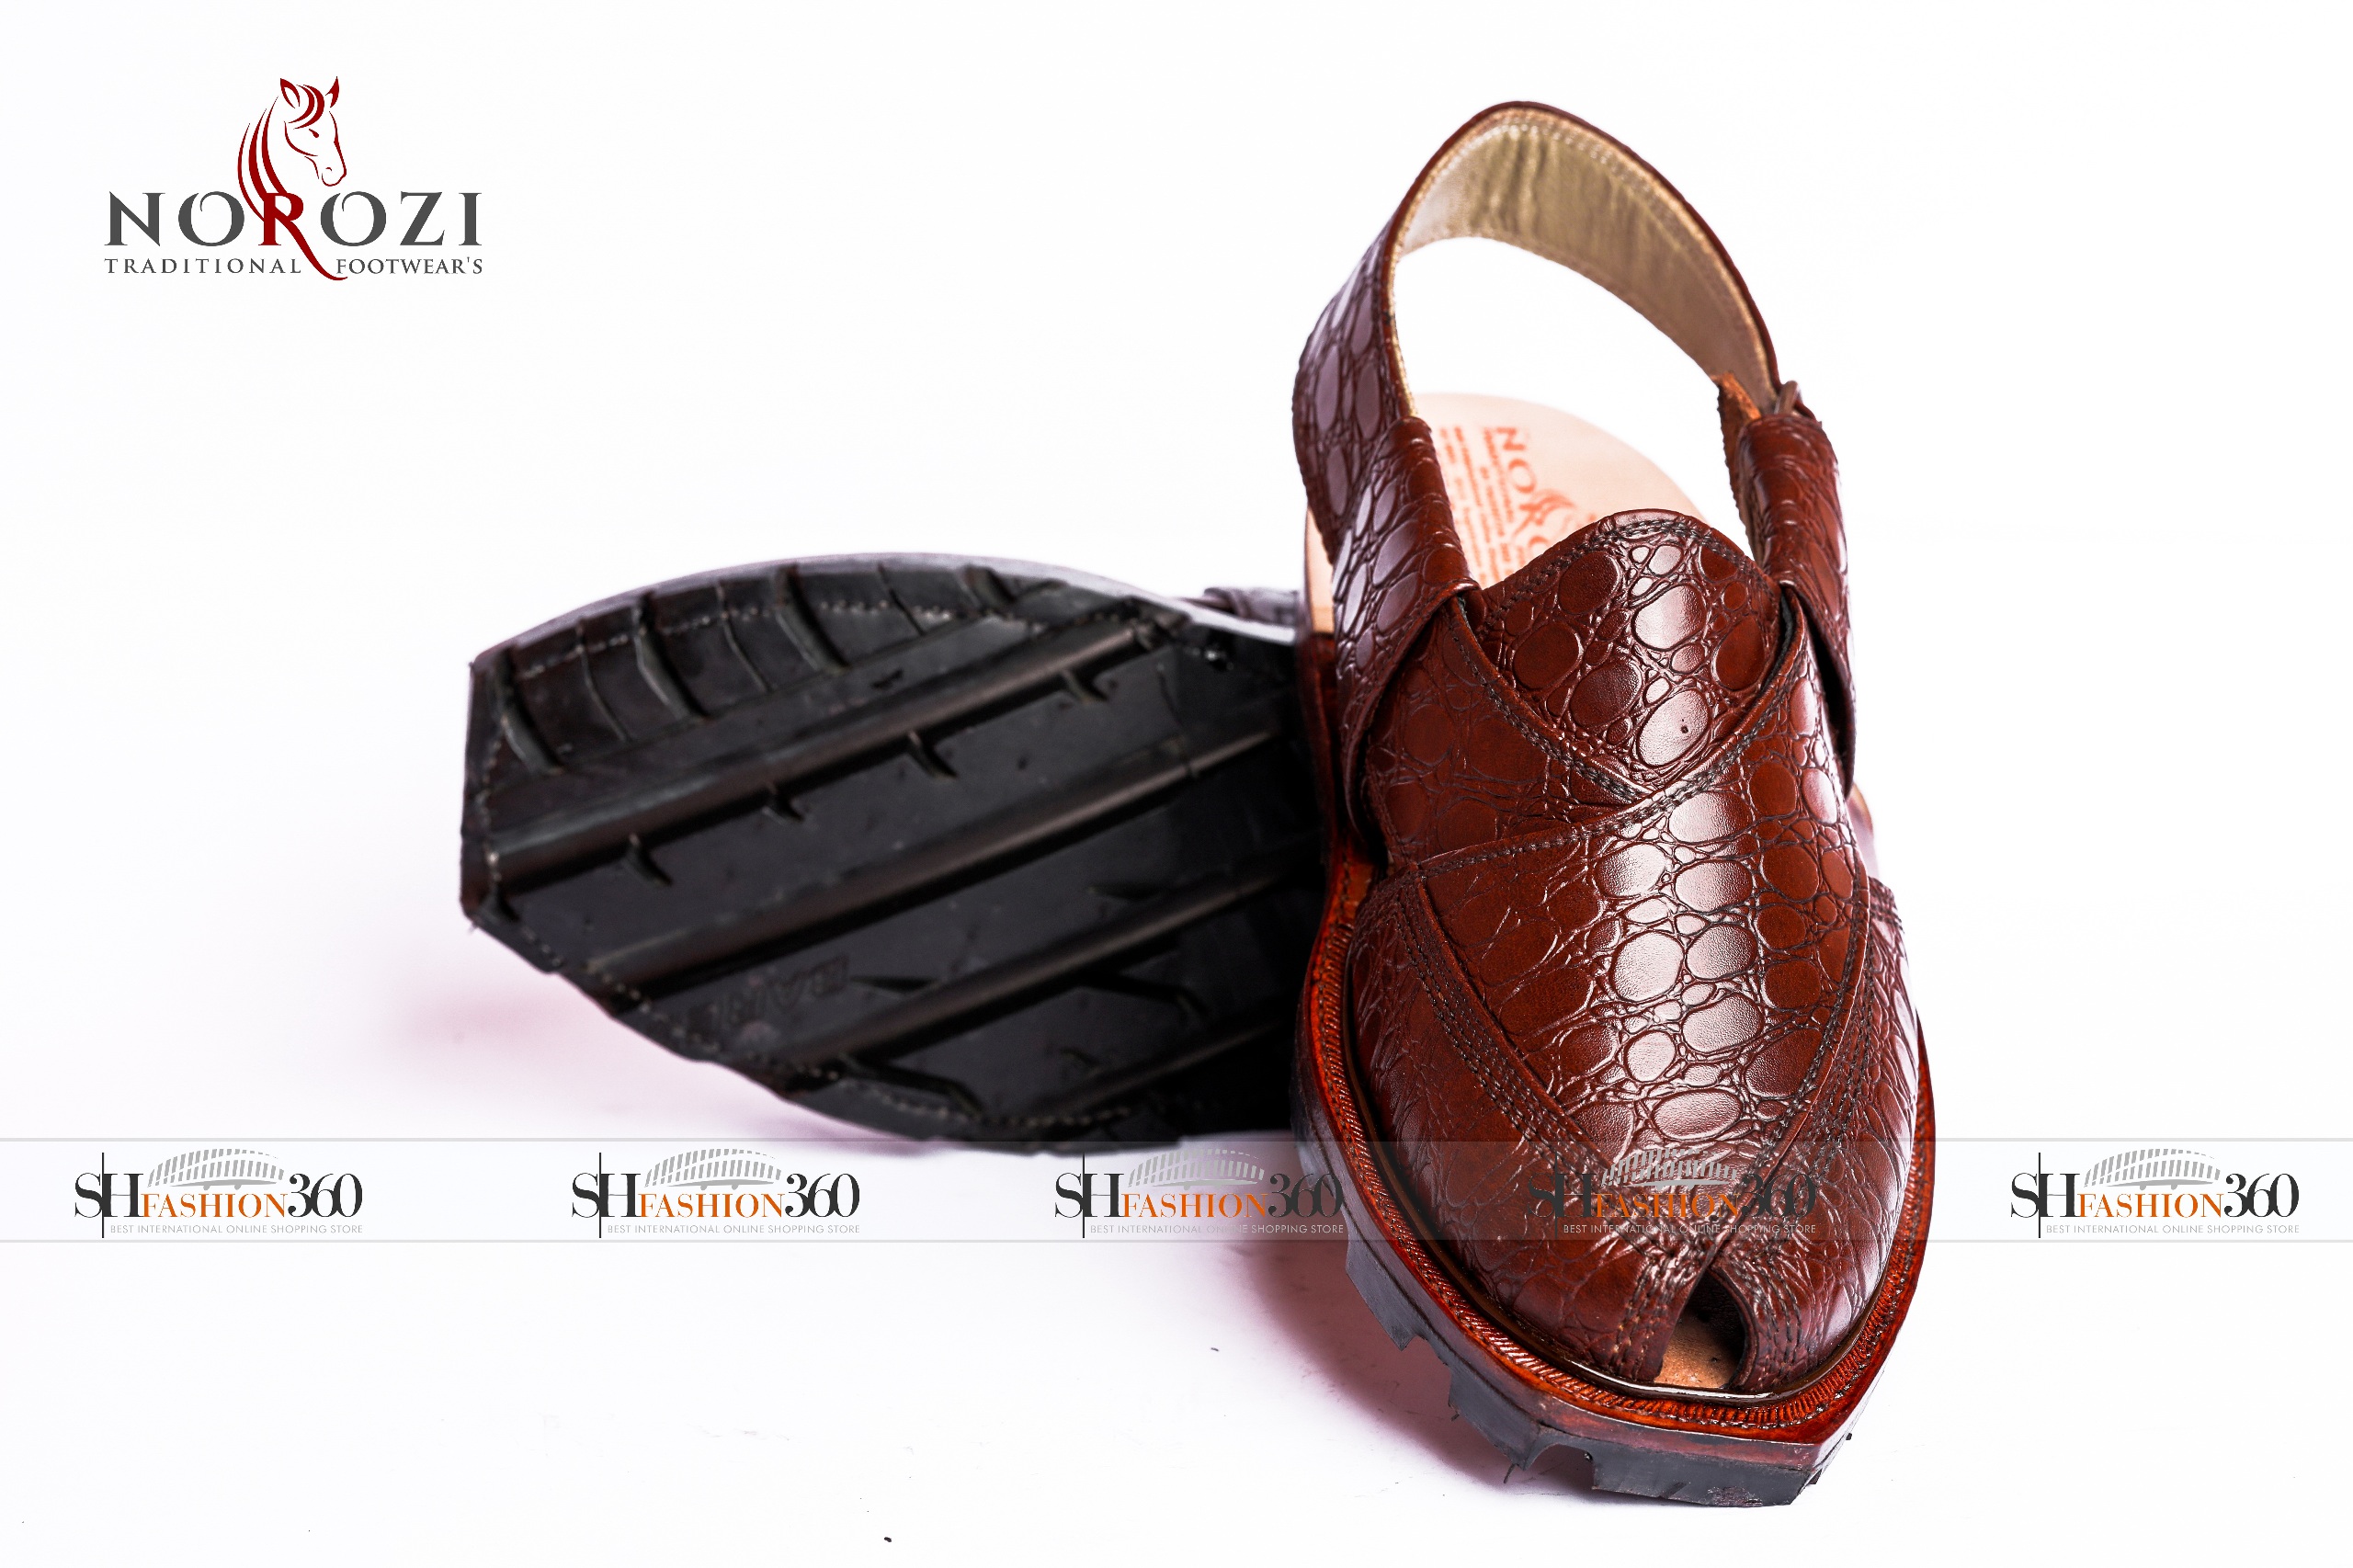 A Crocodile Norozi Chappal with Double Tyre Sole Mustard Red – Norozi